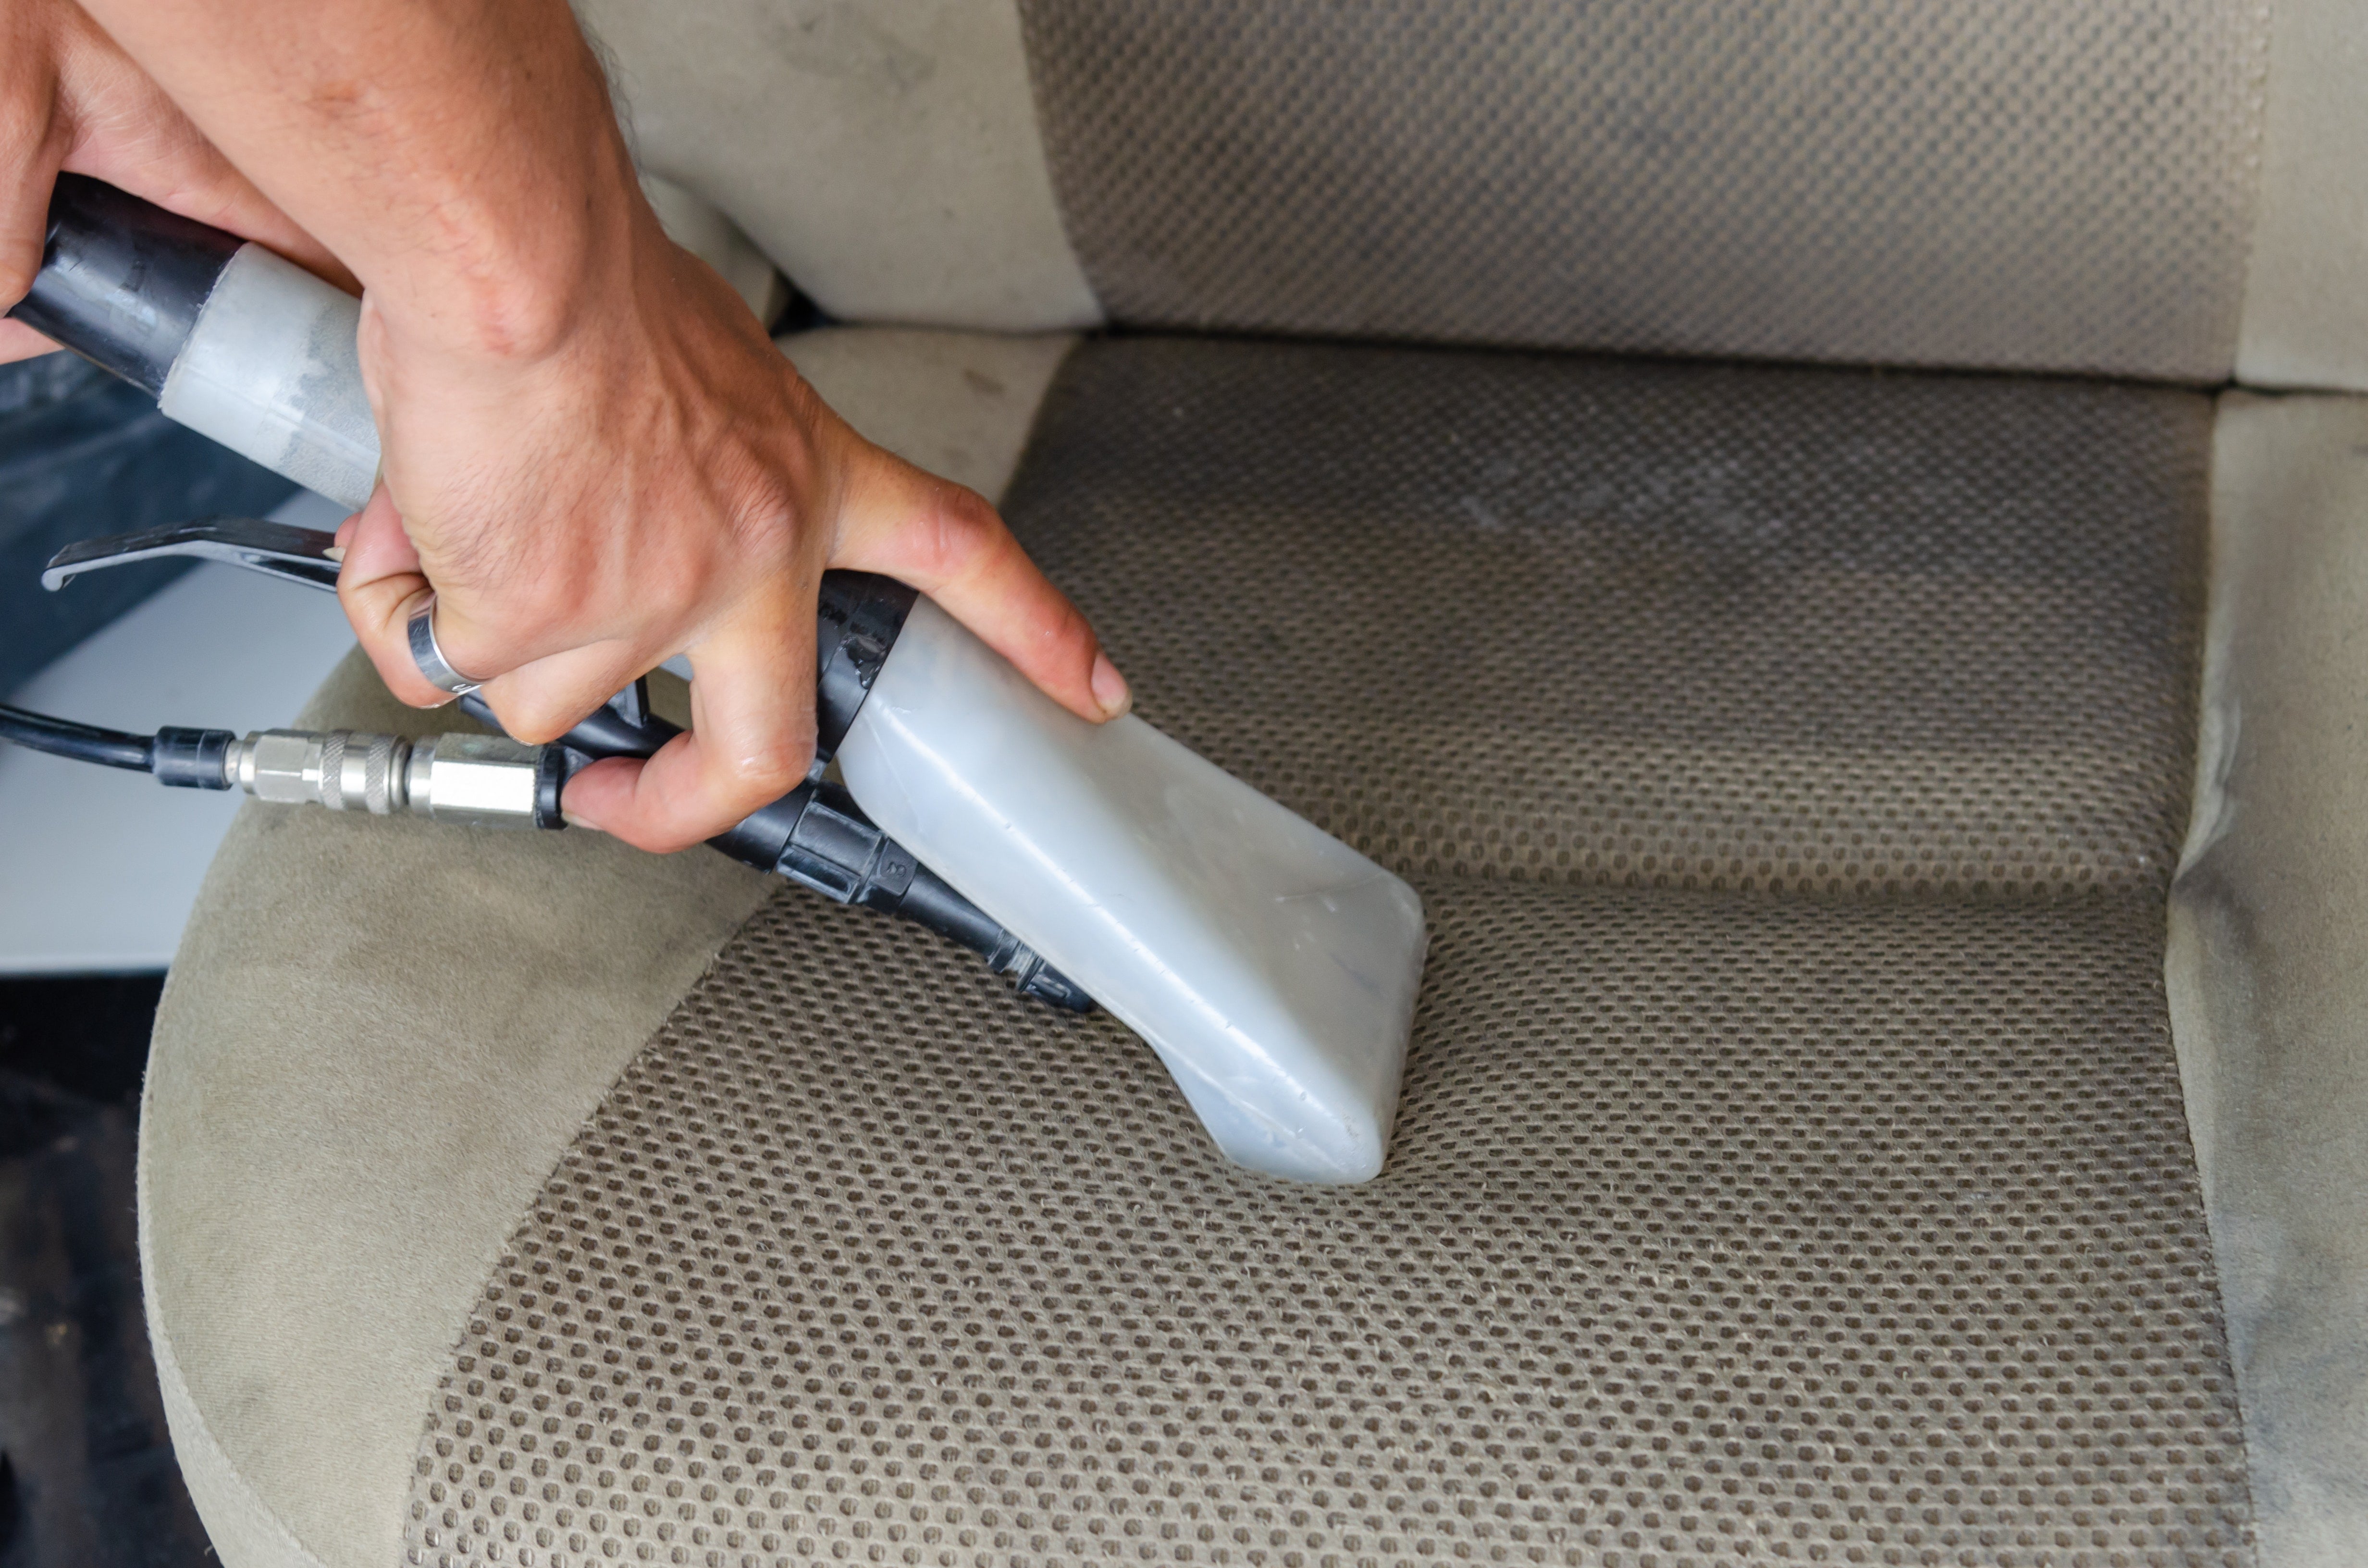 How to clean your car fabric car seats #cleantok #cleanthatup